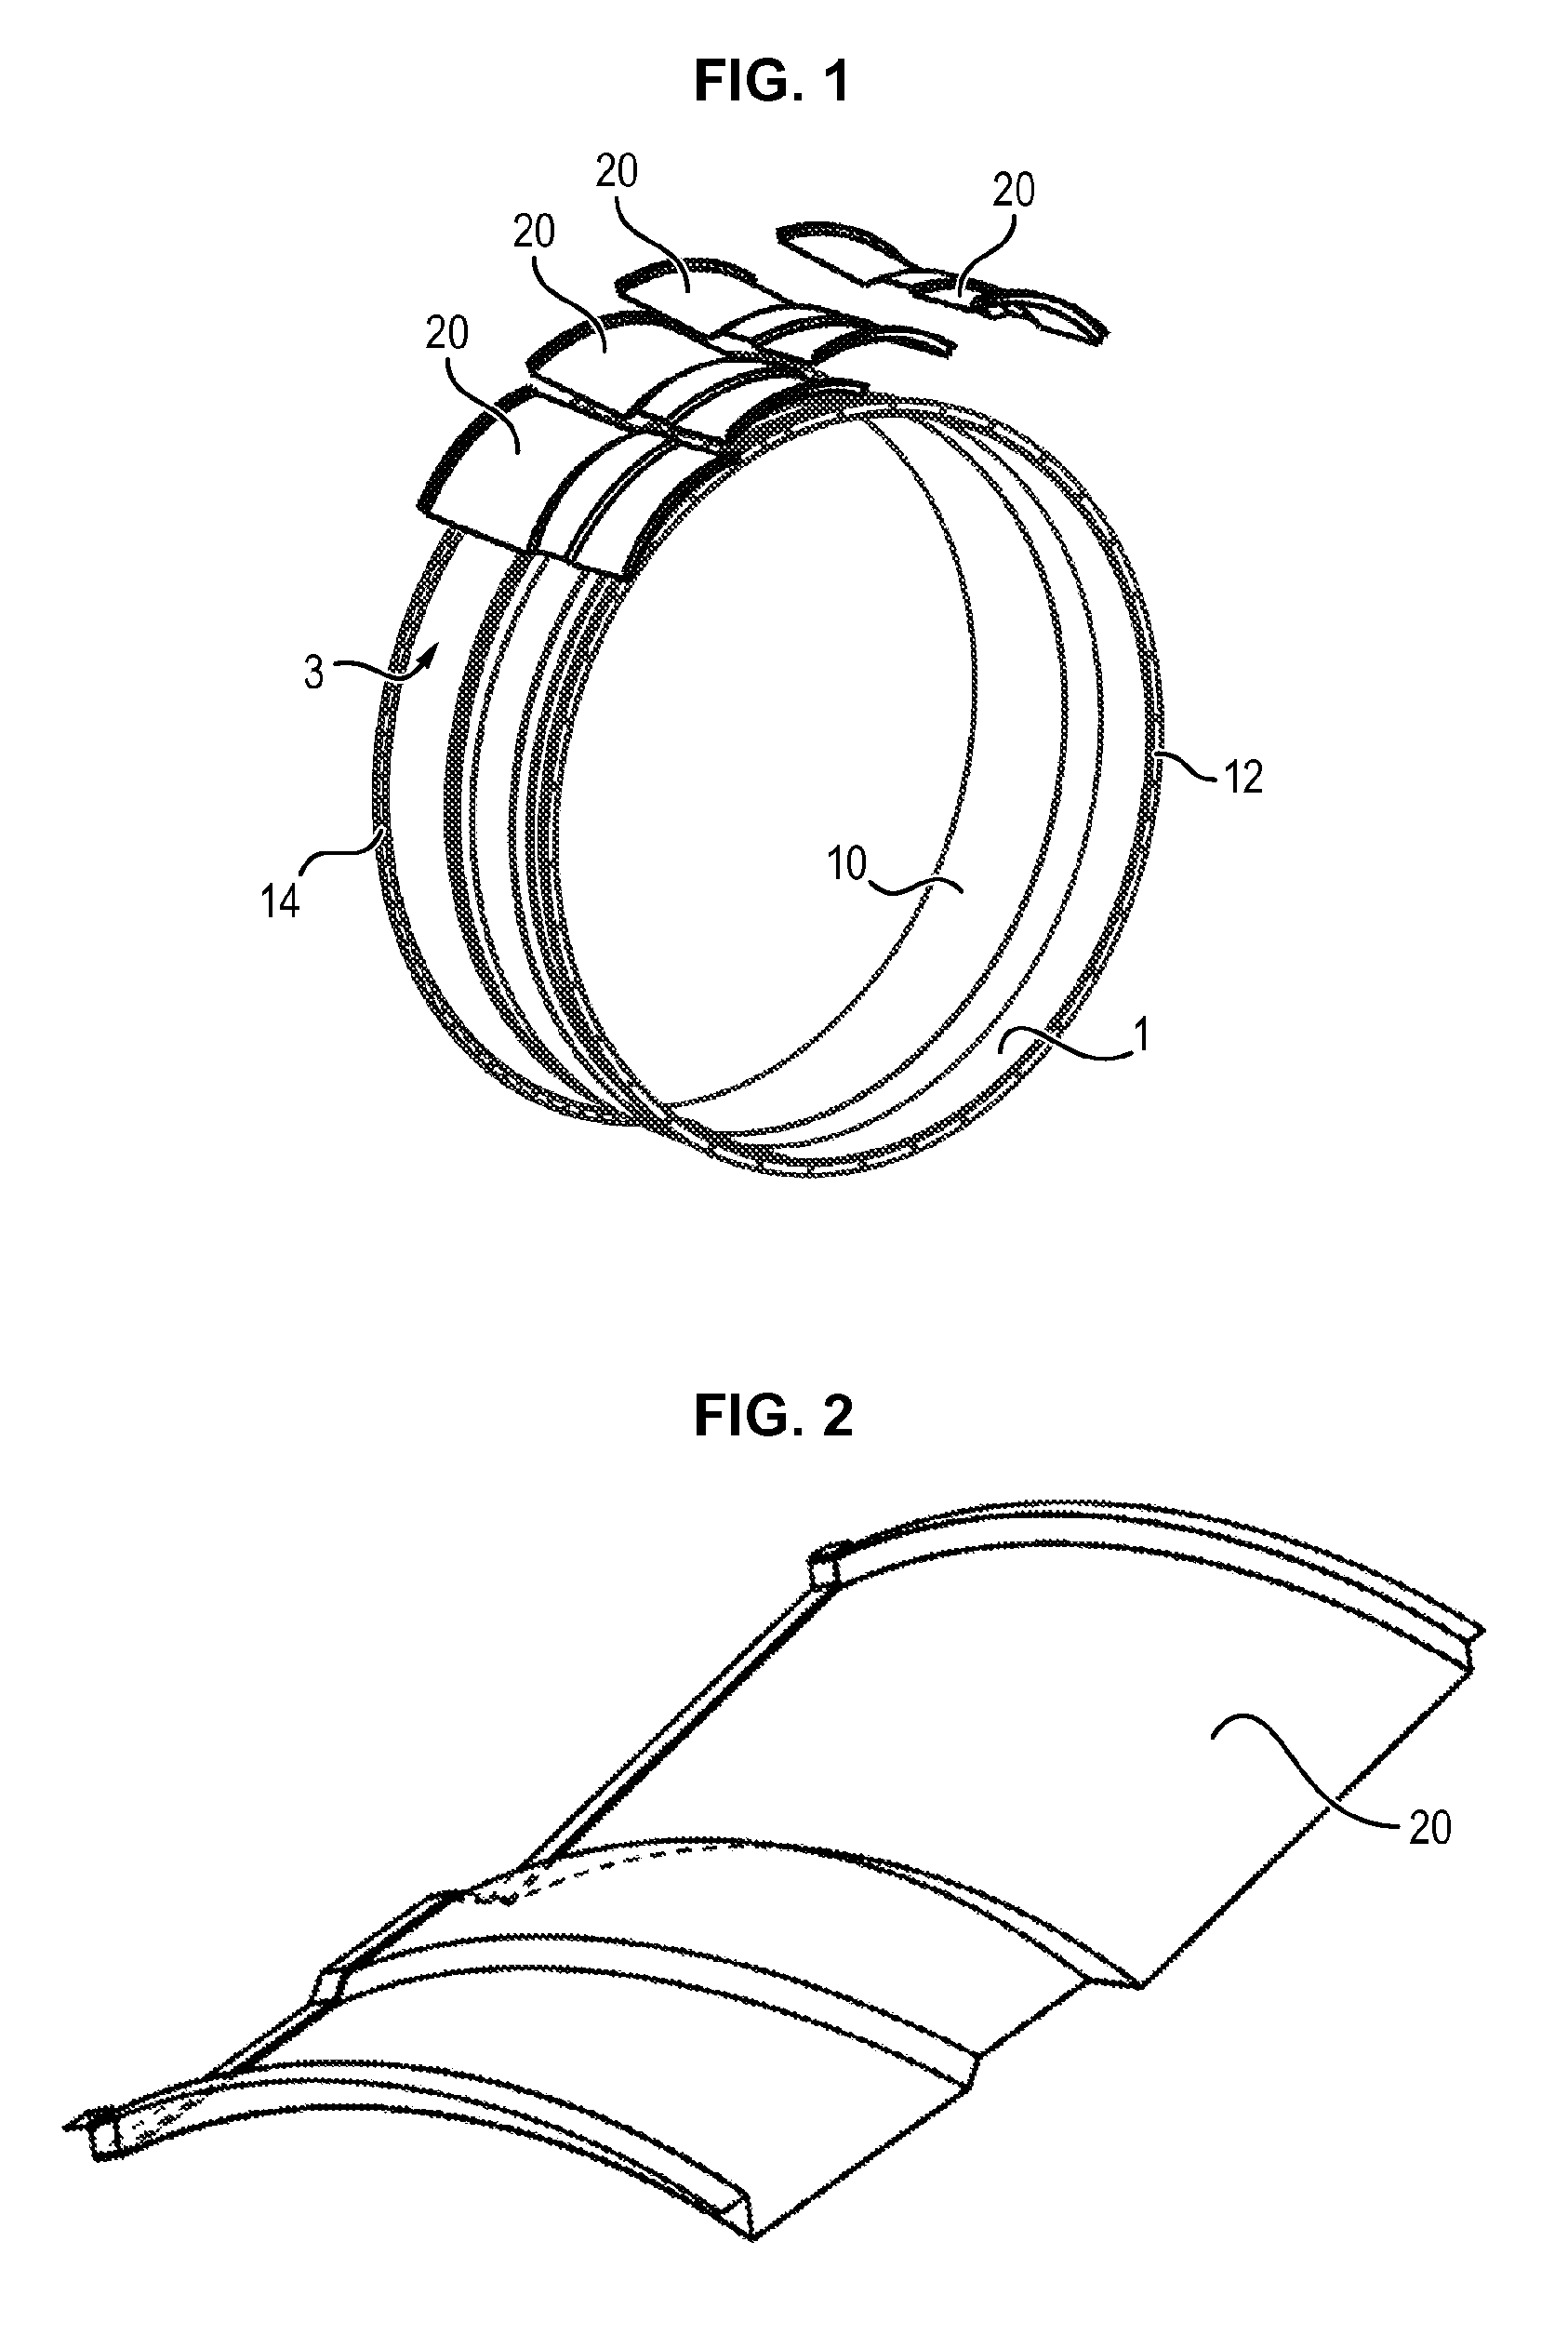 Fire protection of a part made of a three-dimensional woven composite material